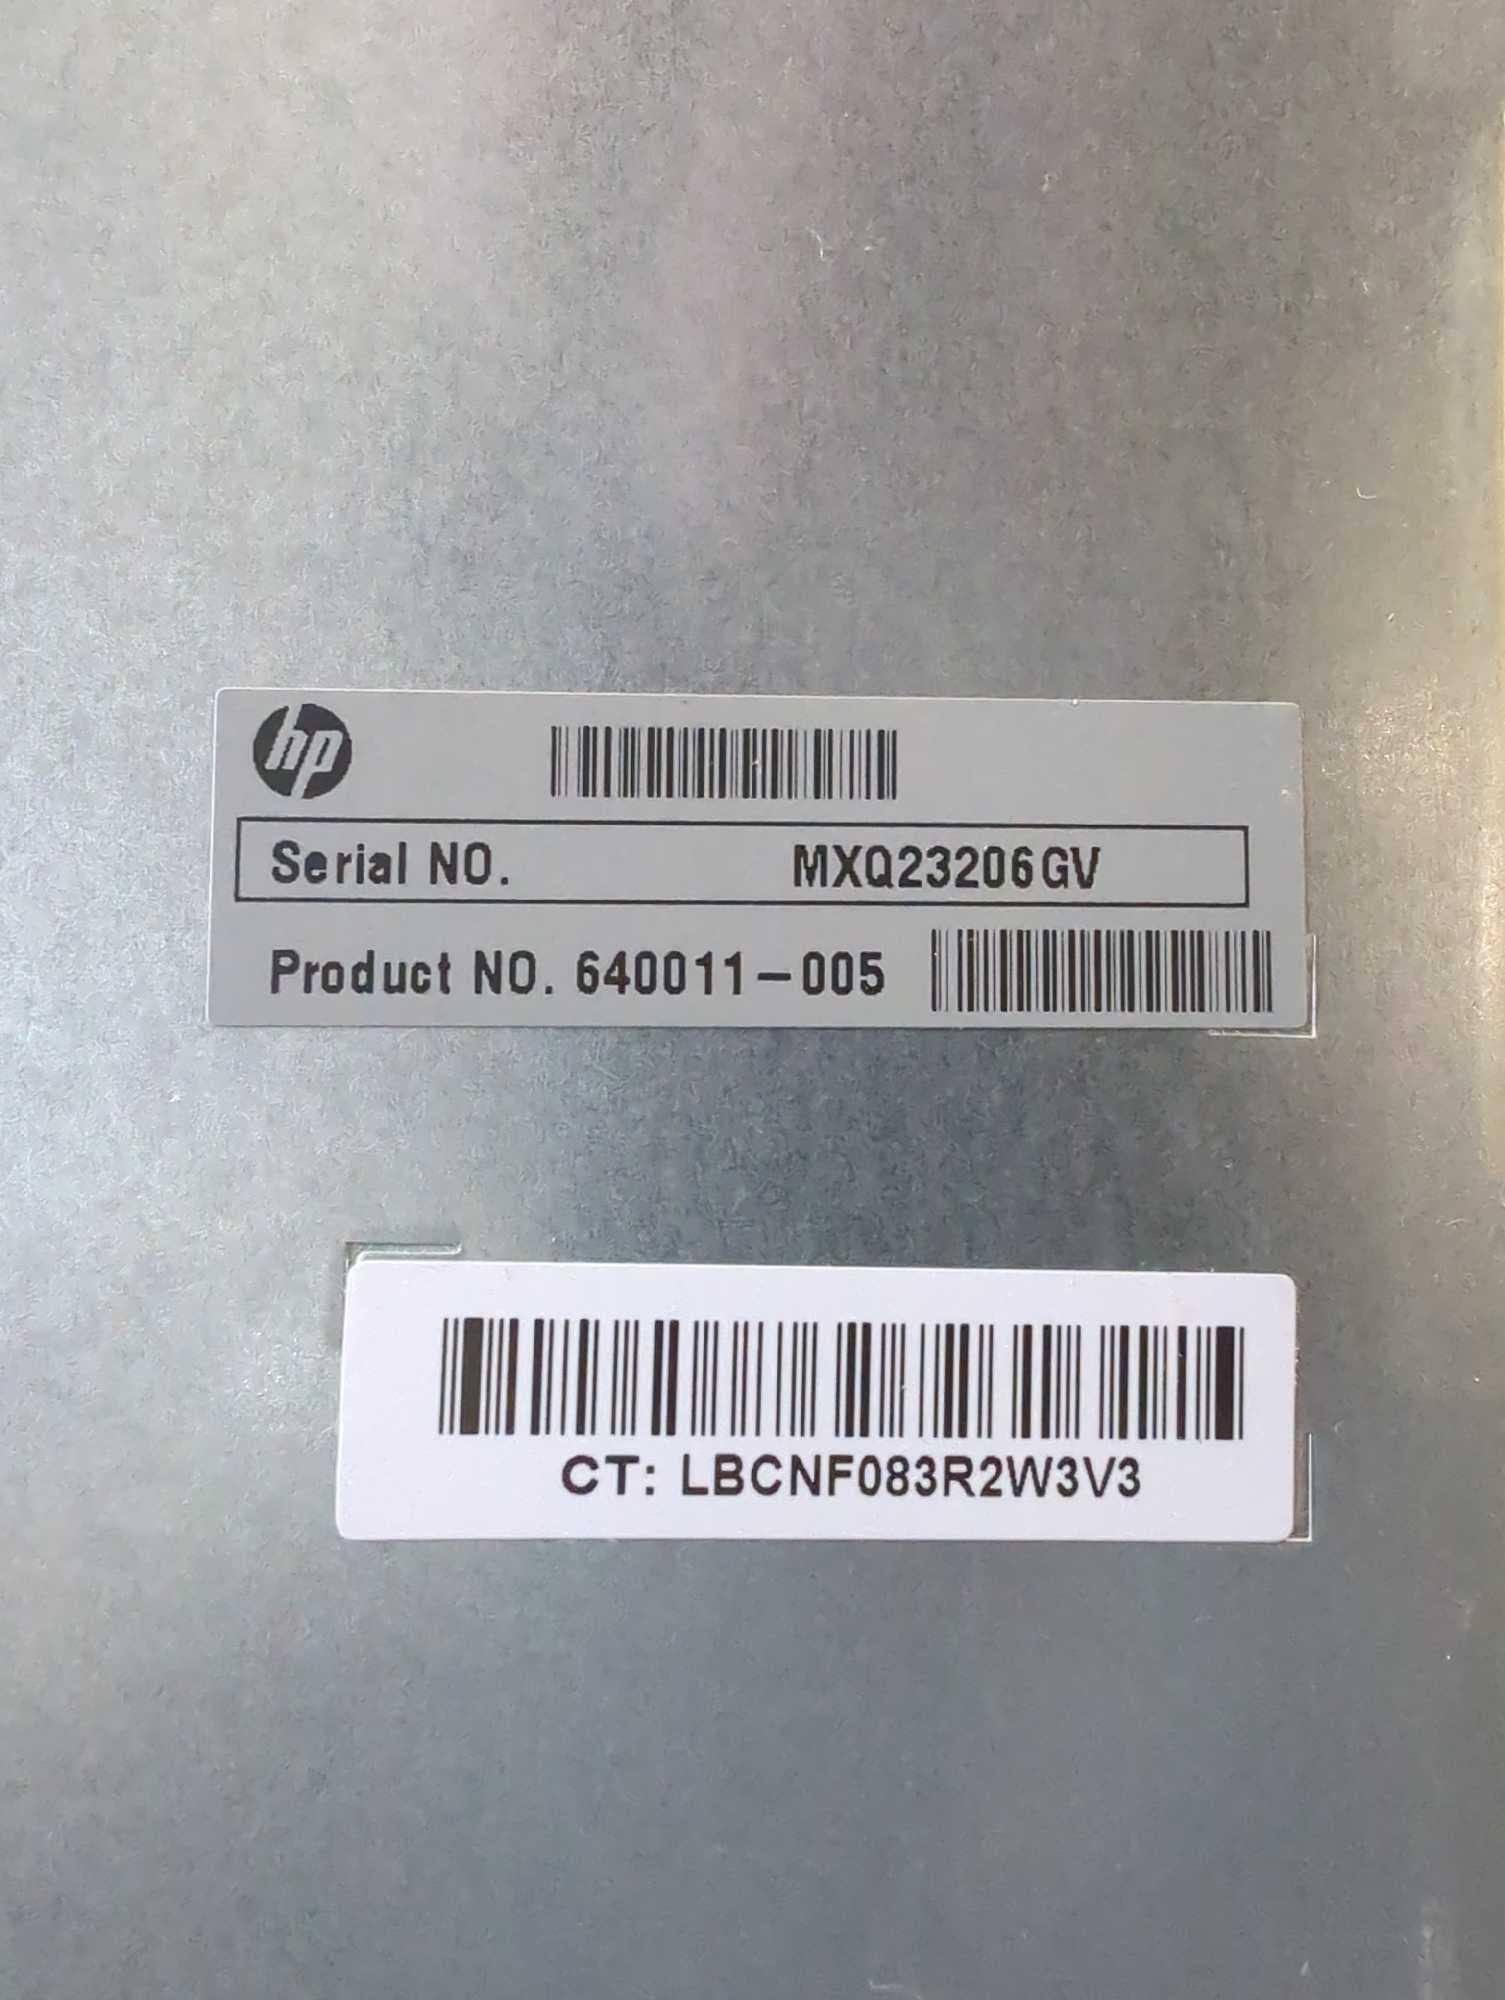 Hewlett Packard Enterprise HSTNS-2133 server, Wiped Clean, 750W, What you see in photos is what you